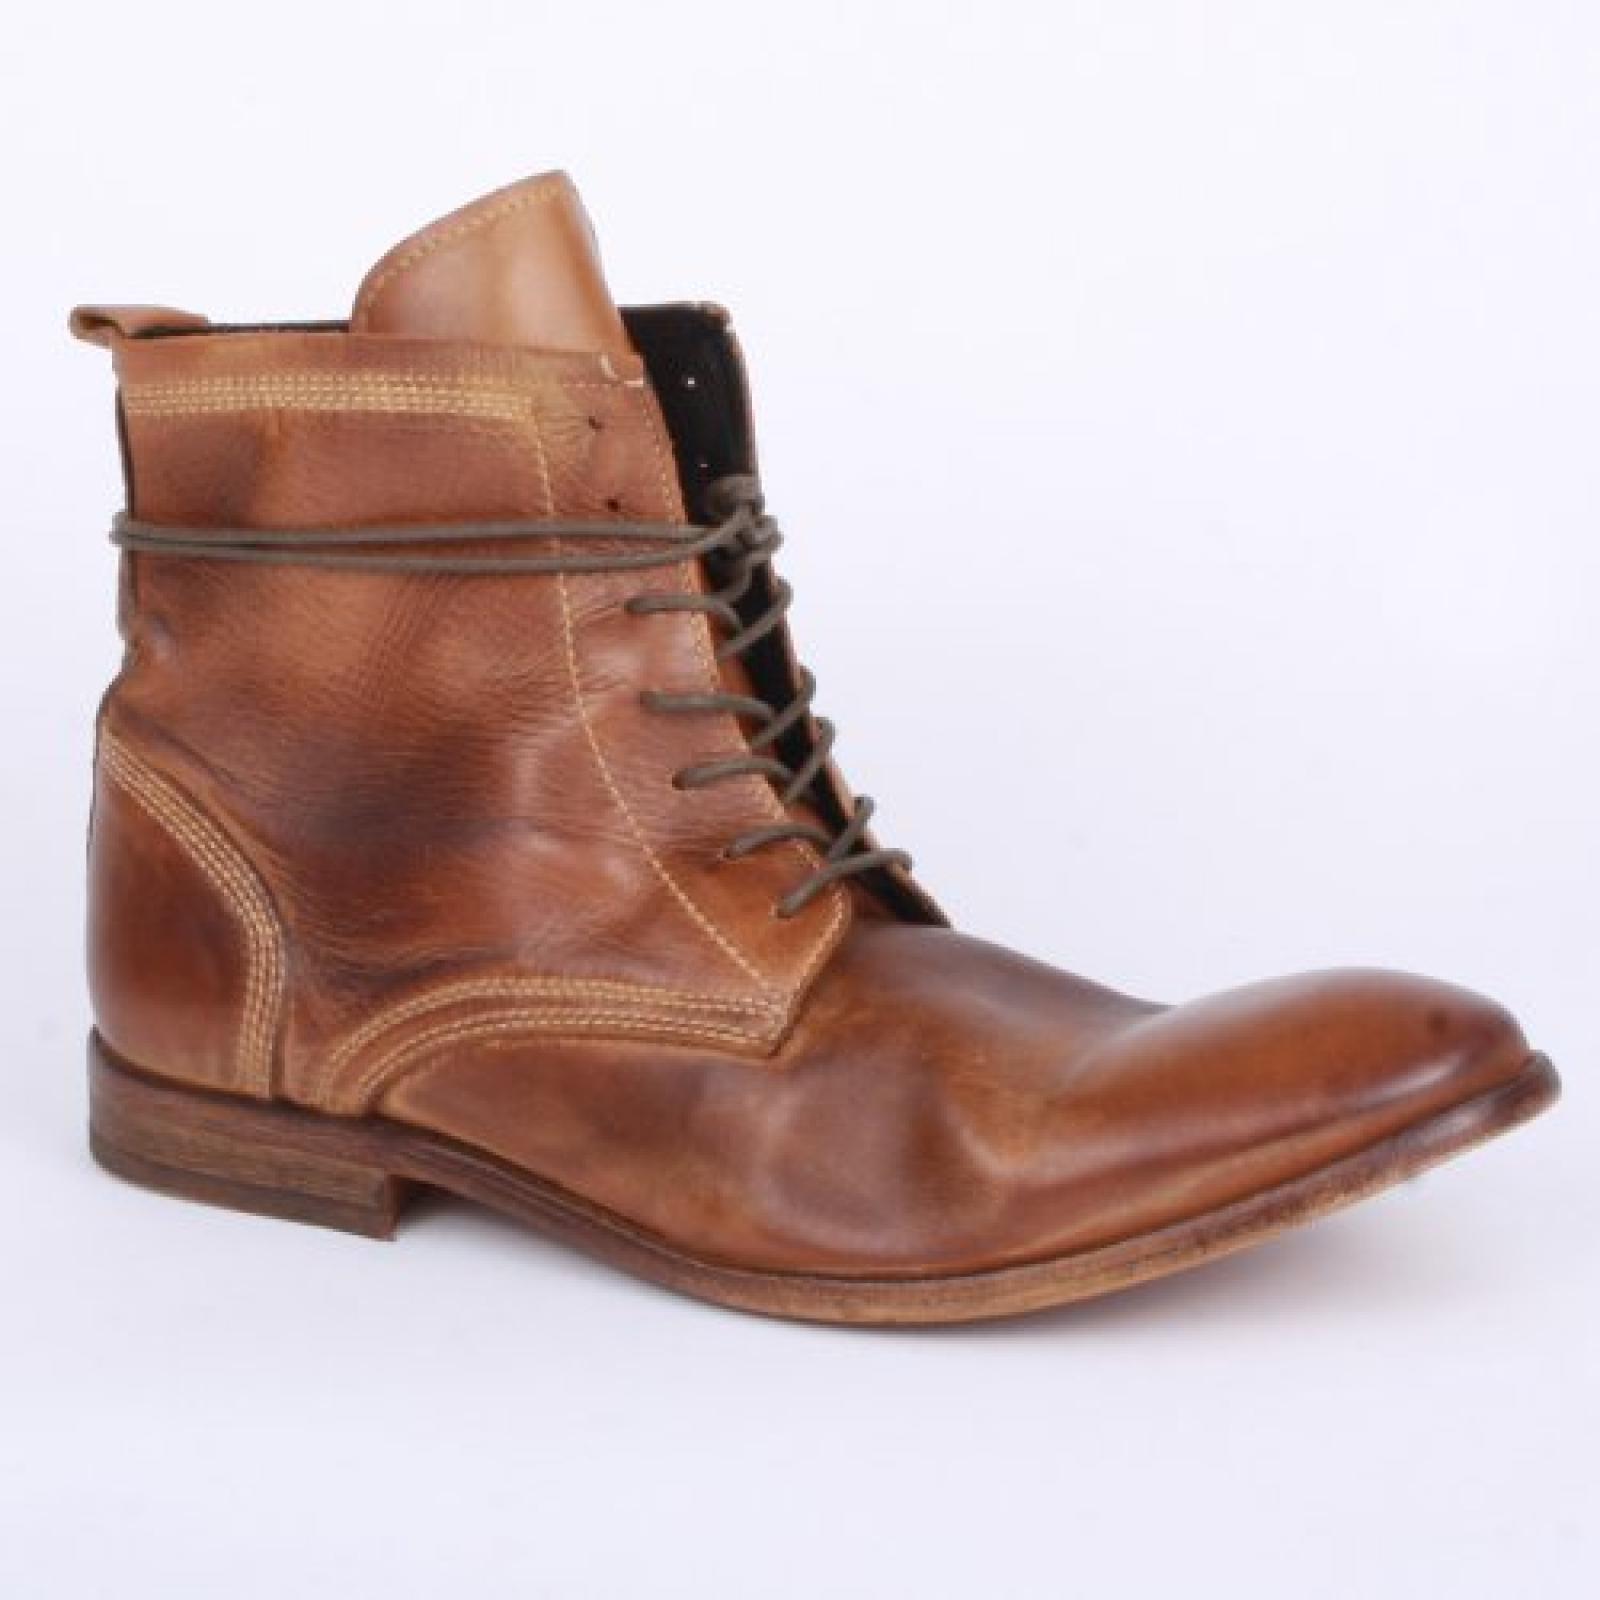 H by Hudson Swathmore Herren Ankle Boots 